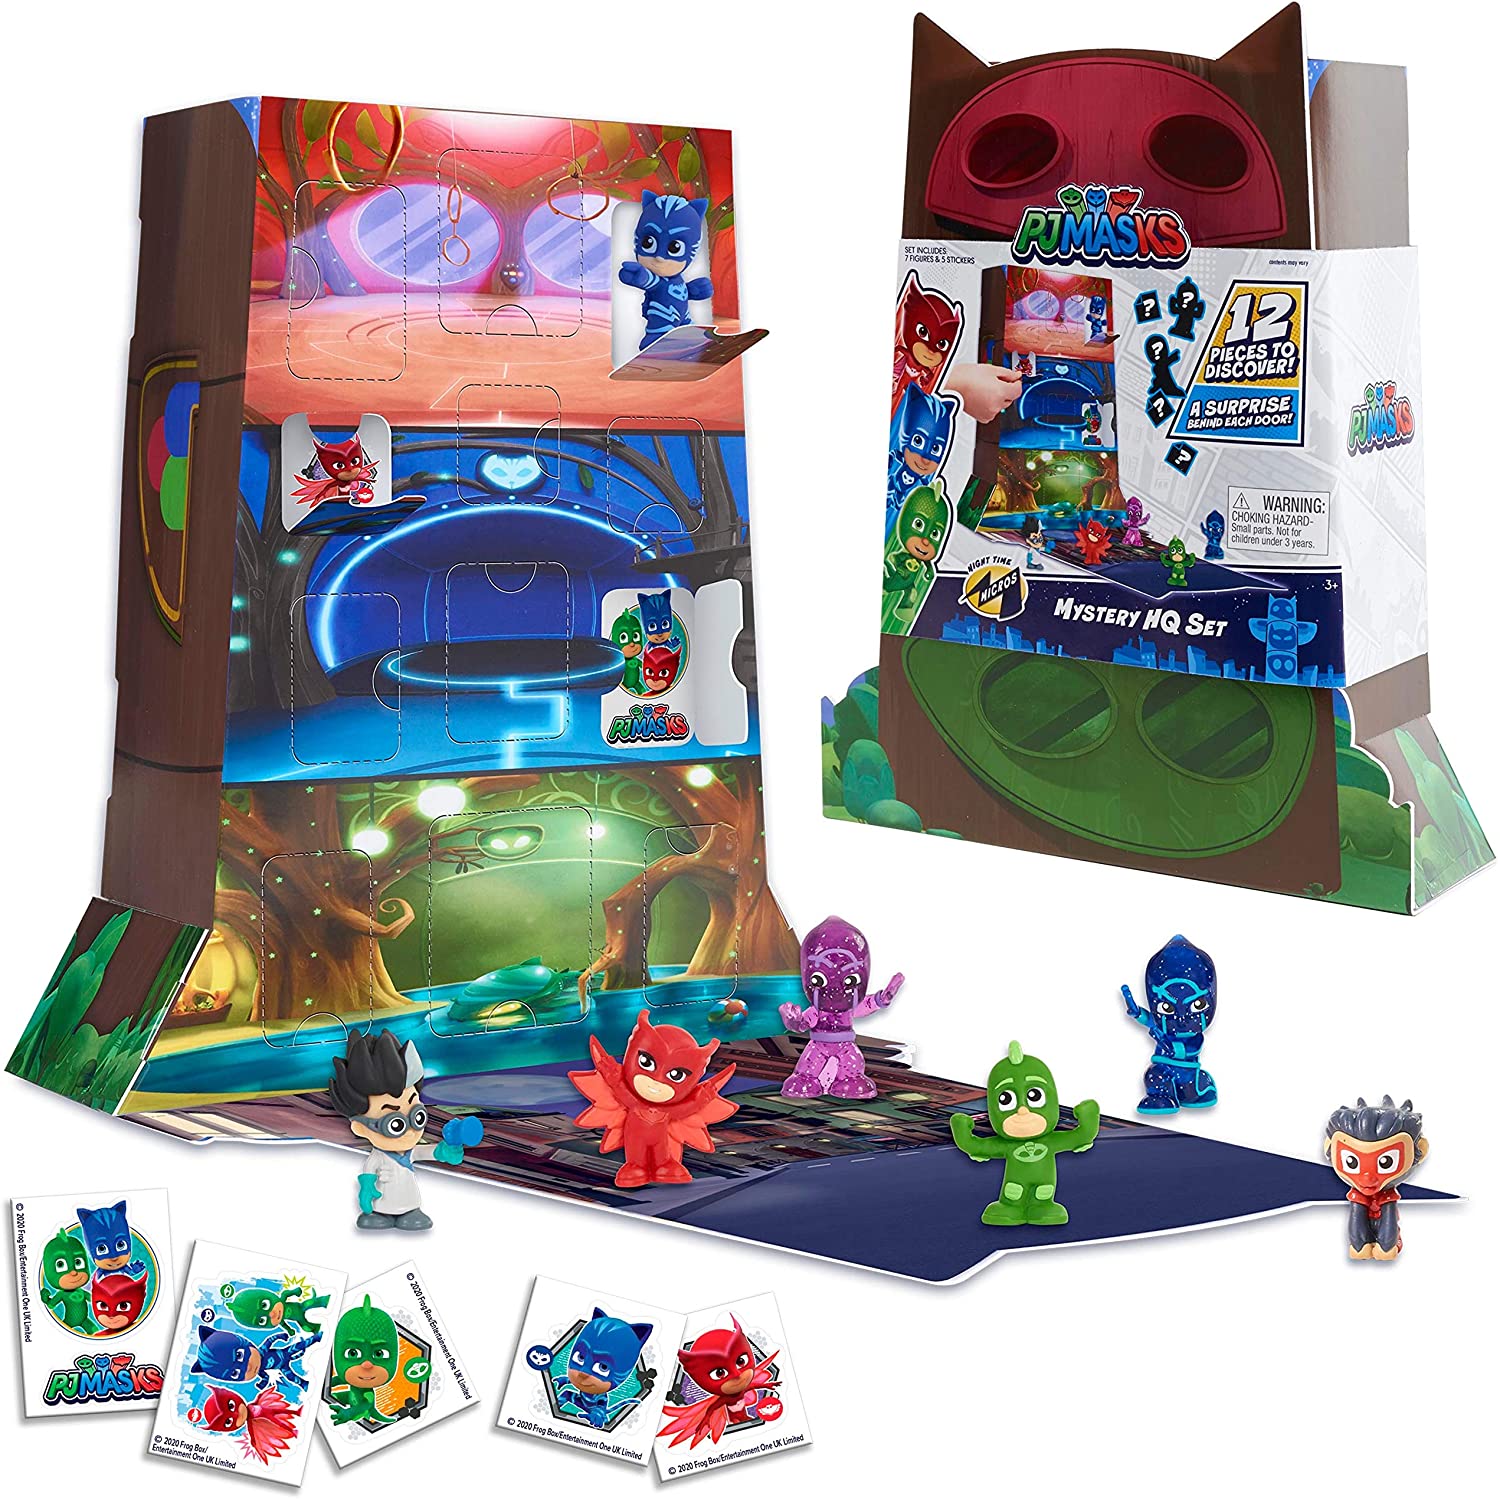 PJ Masks Night Time Micros Mystery HQ Box Set $8.40 + Free Shipping w/ Prime or on $25+